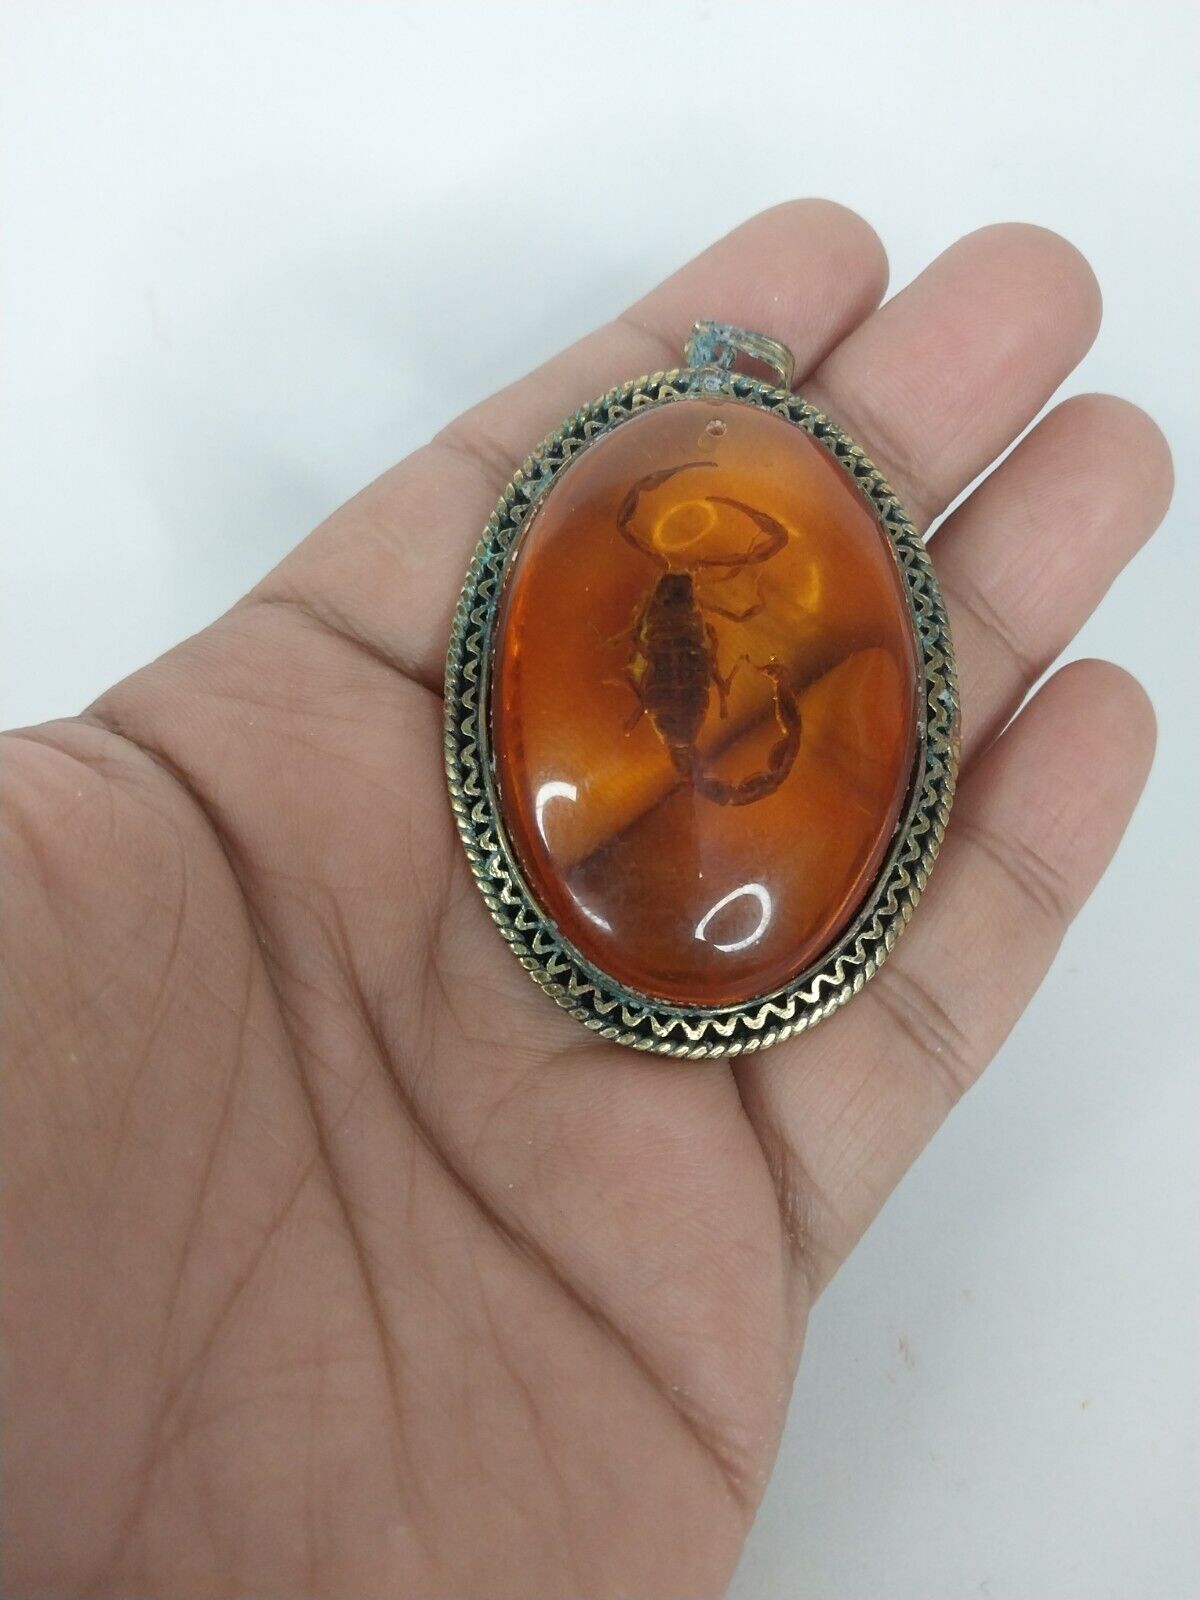 RARE ANCIENT EGYPTIAN ANTIQUE Scorpion Dead Amber Pendent Necklace